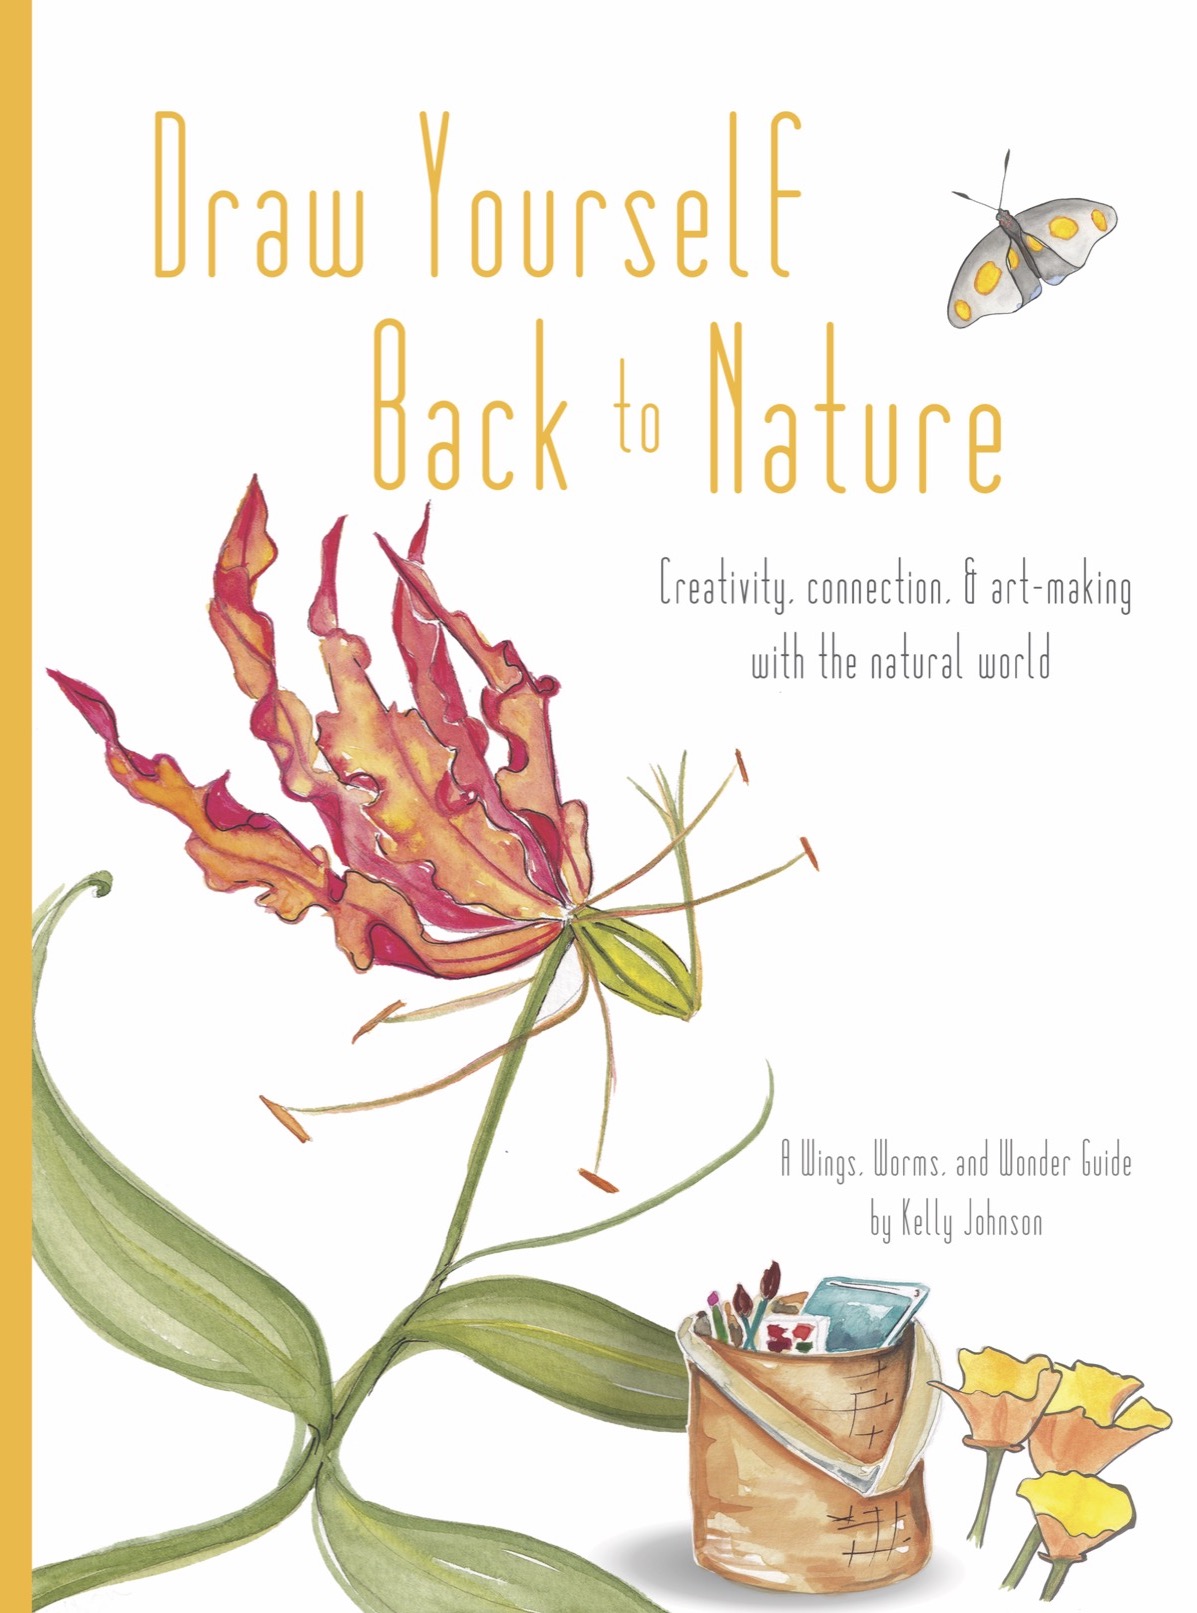 Draw Yourself Back to Nature the book is the perfect guide for everyone seeking to connect with nature through art and creativity! Regardless of experience this Wings, Worms, and Wonder step by step project based book will guide you on your nature journaling journey! Click to learn more and get your copy!